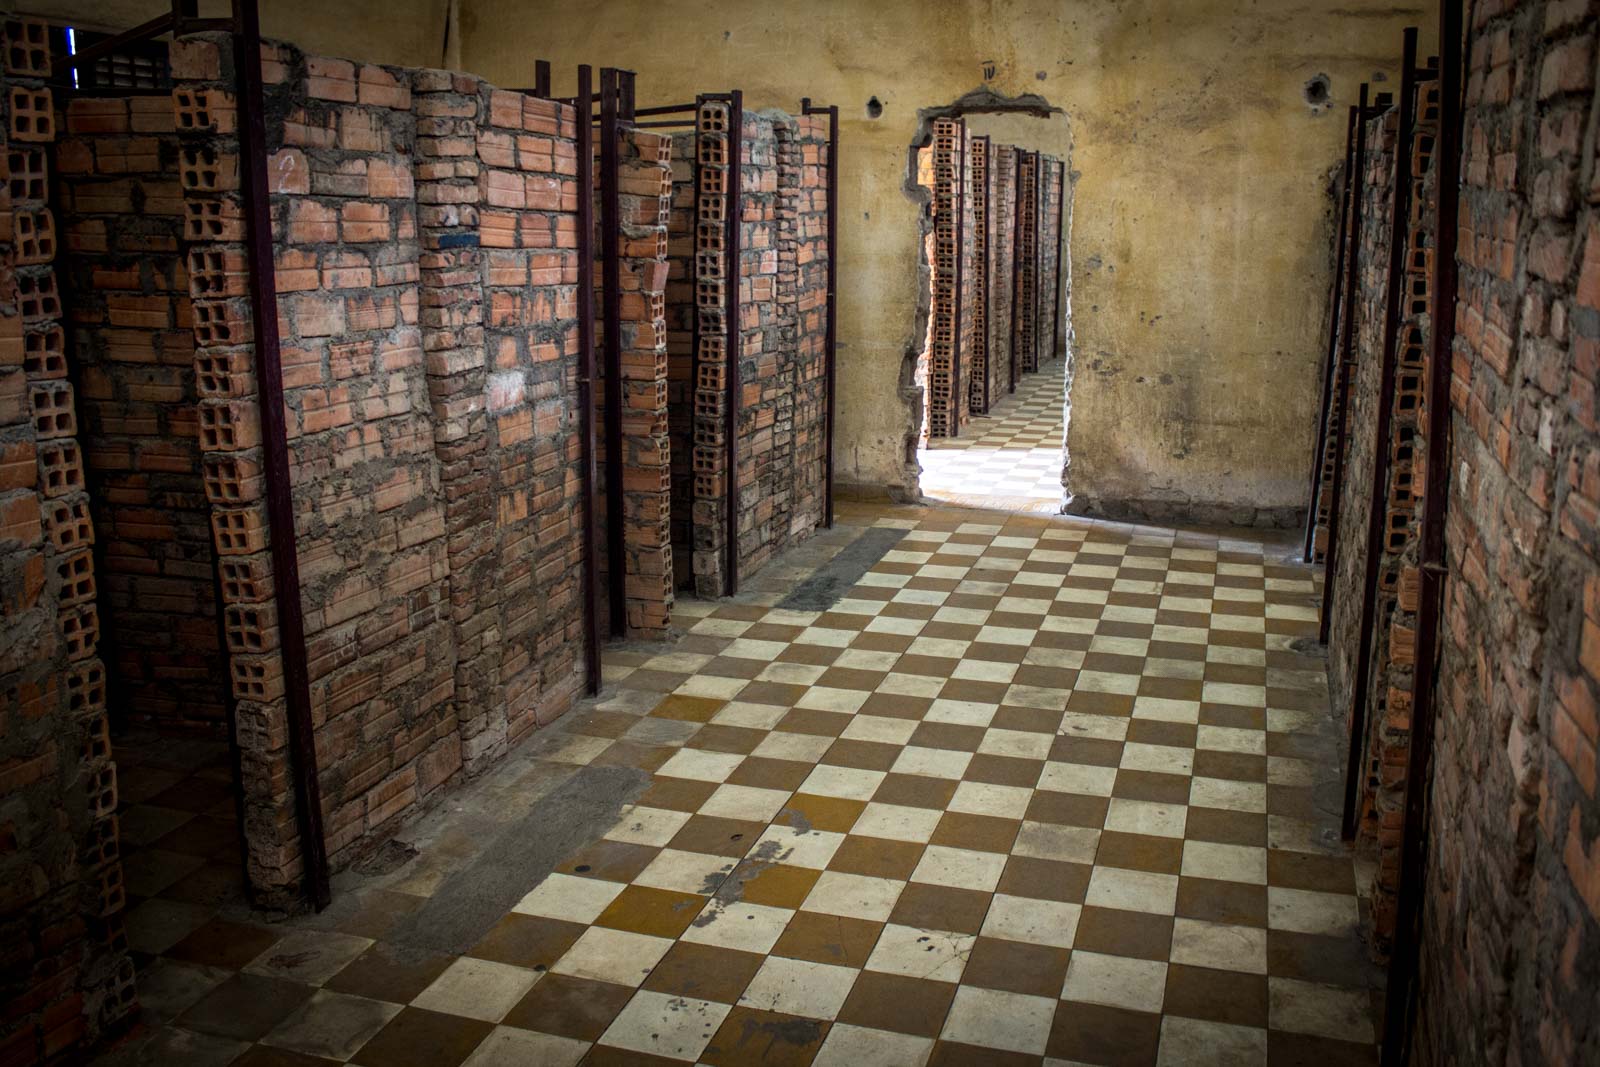 What to see in Phnom Penh Tuol Sleng Genocide Museum